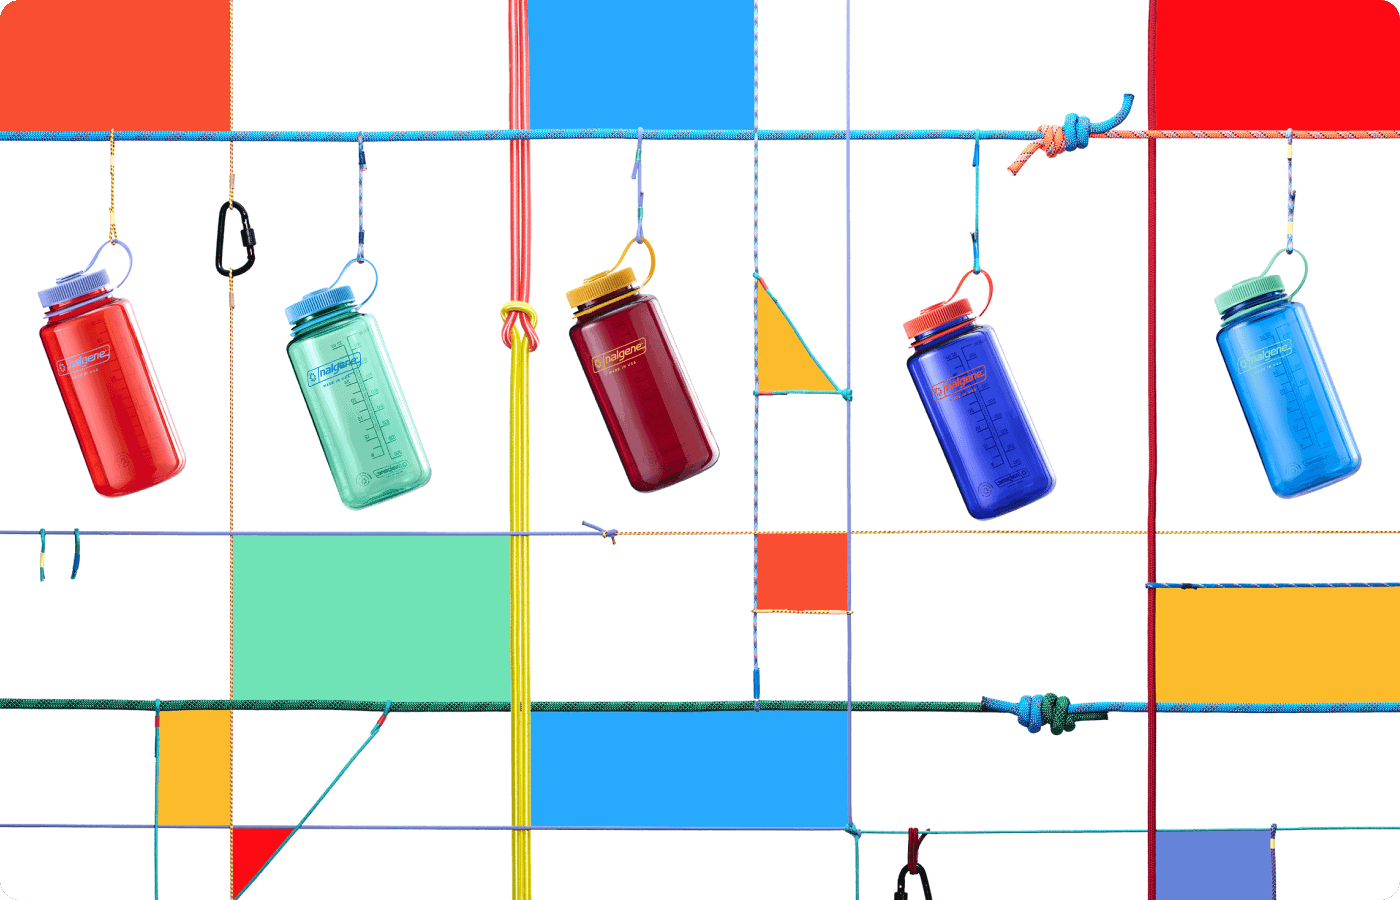 5 Nalgene water bottles from the colorblock collection